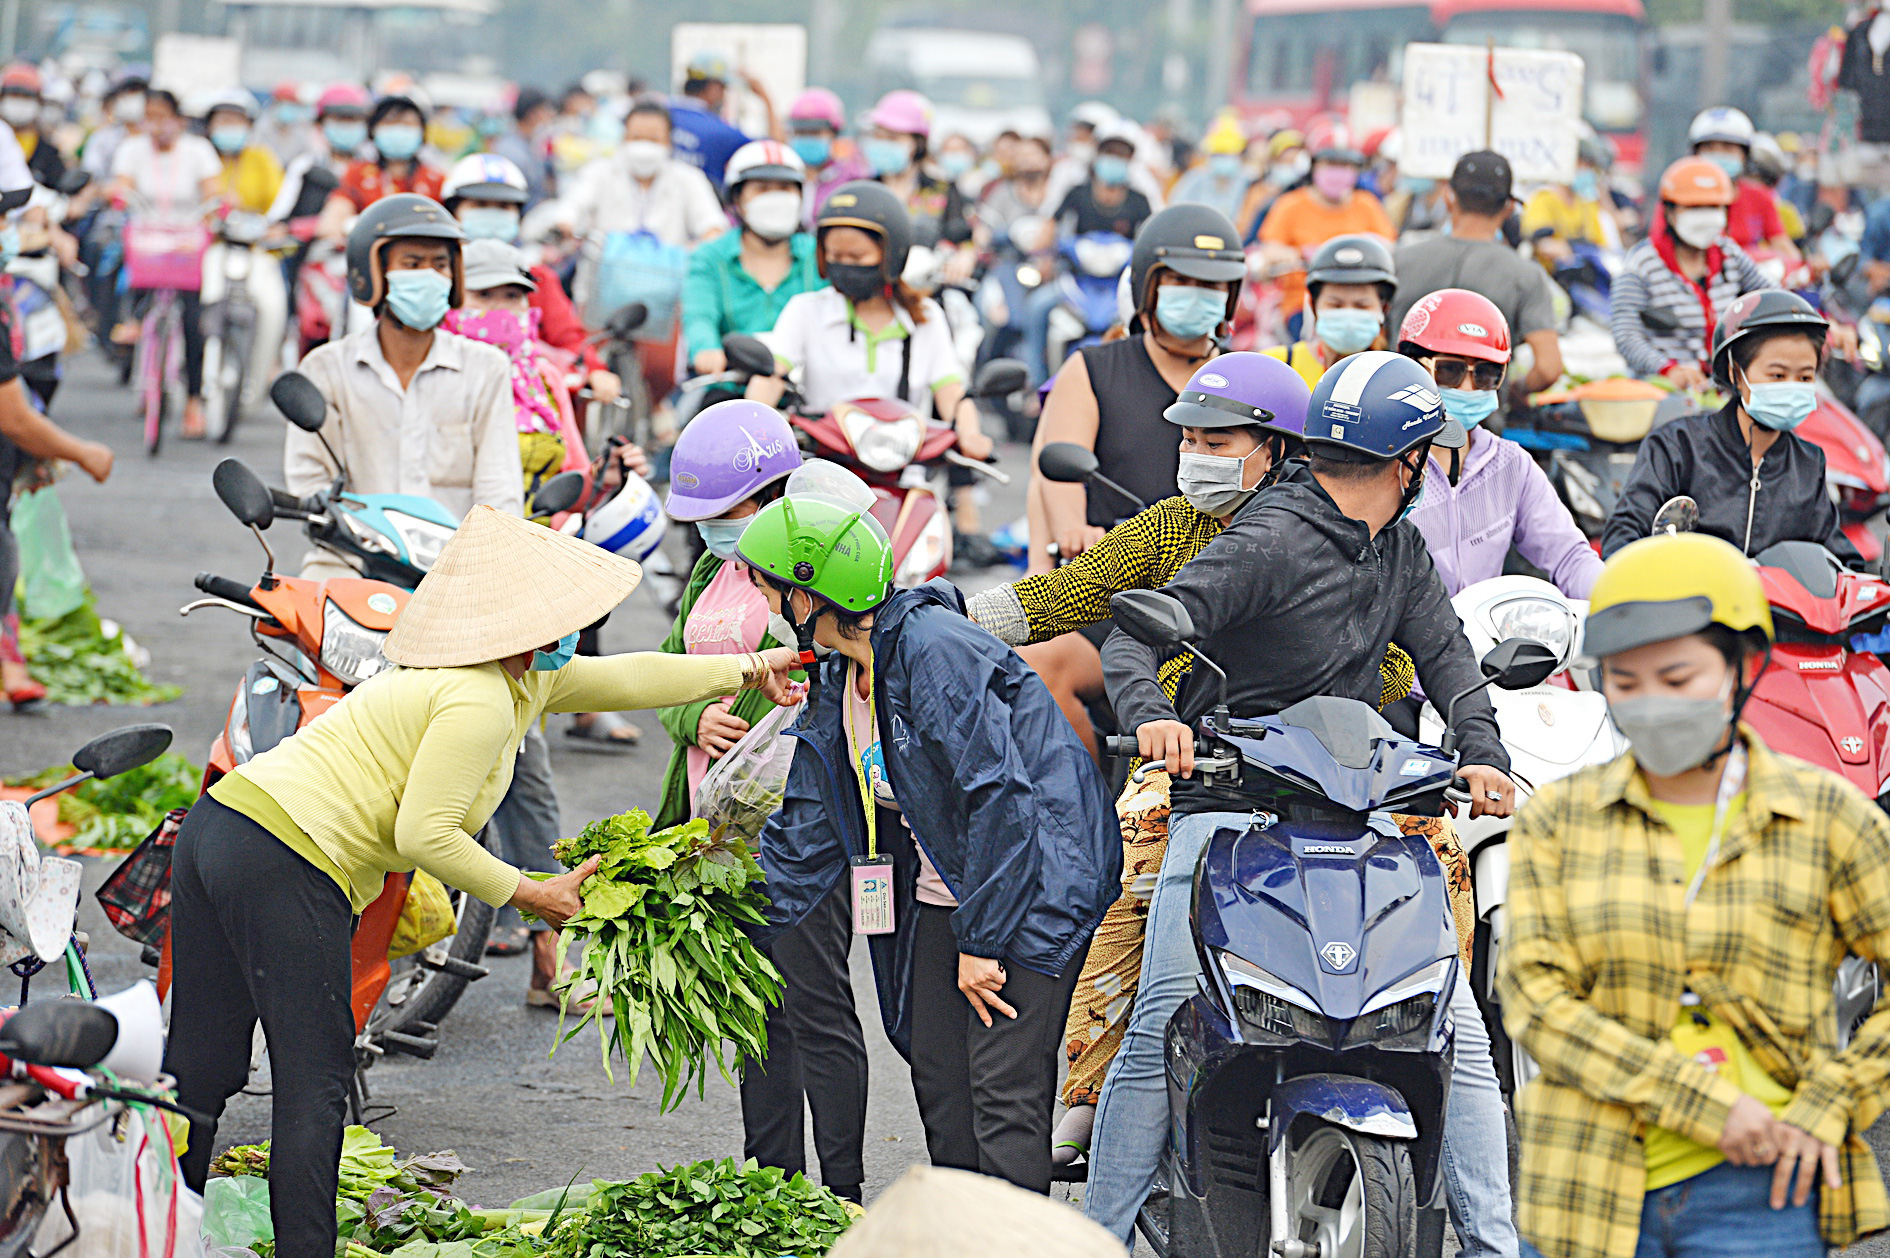 January-May unemployment, underemployment affect 500K+ workers in Vietnam